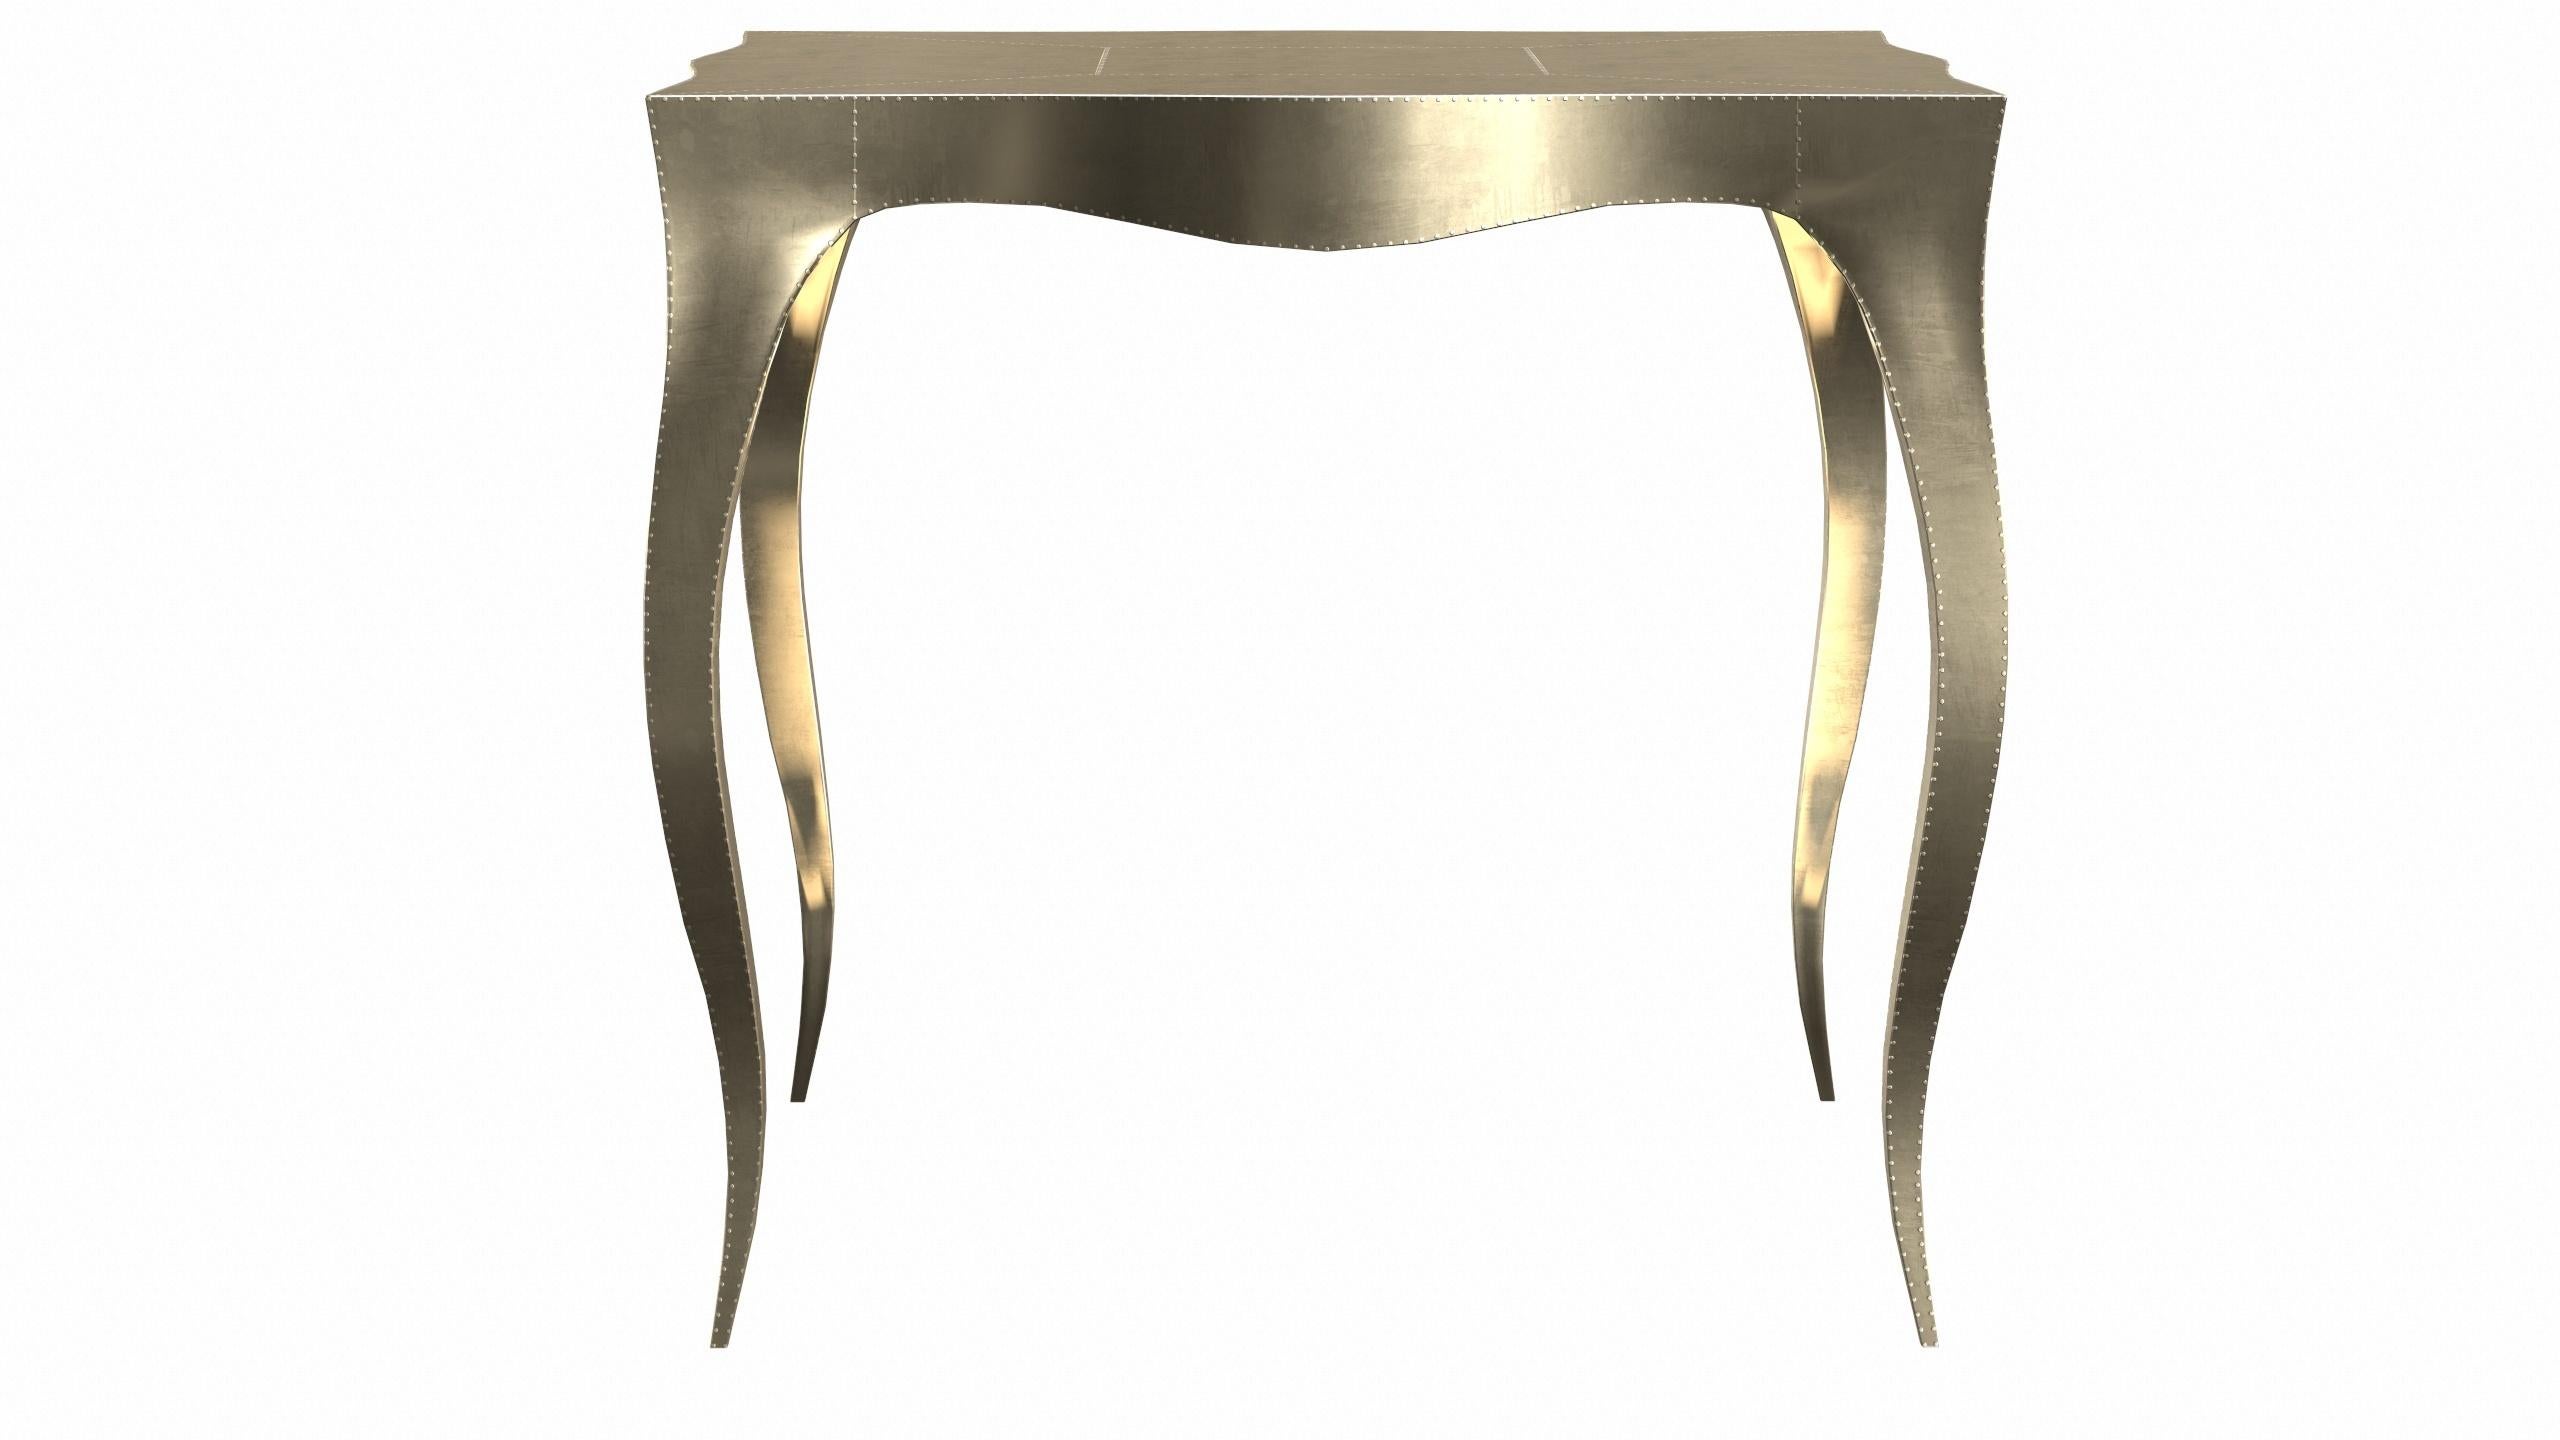 Hand-Carved Louise Art Deco Nesting Tables and Stacking Tables Smooth Brass by Paul Mathieu For Sale